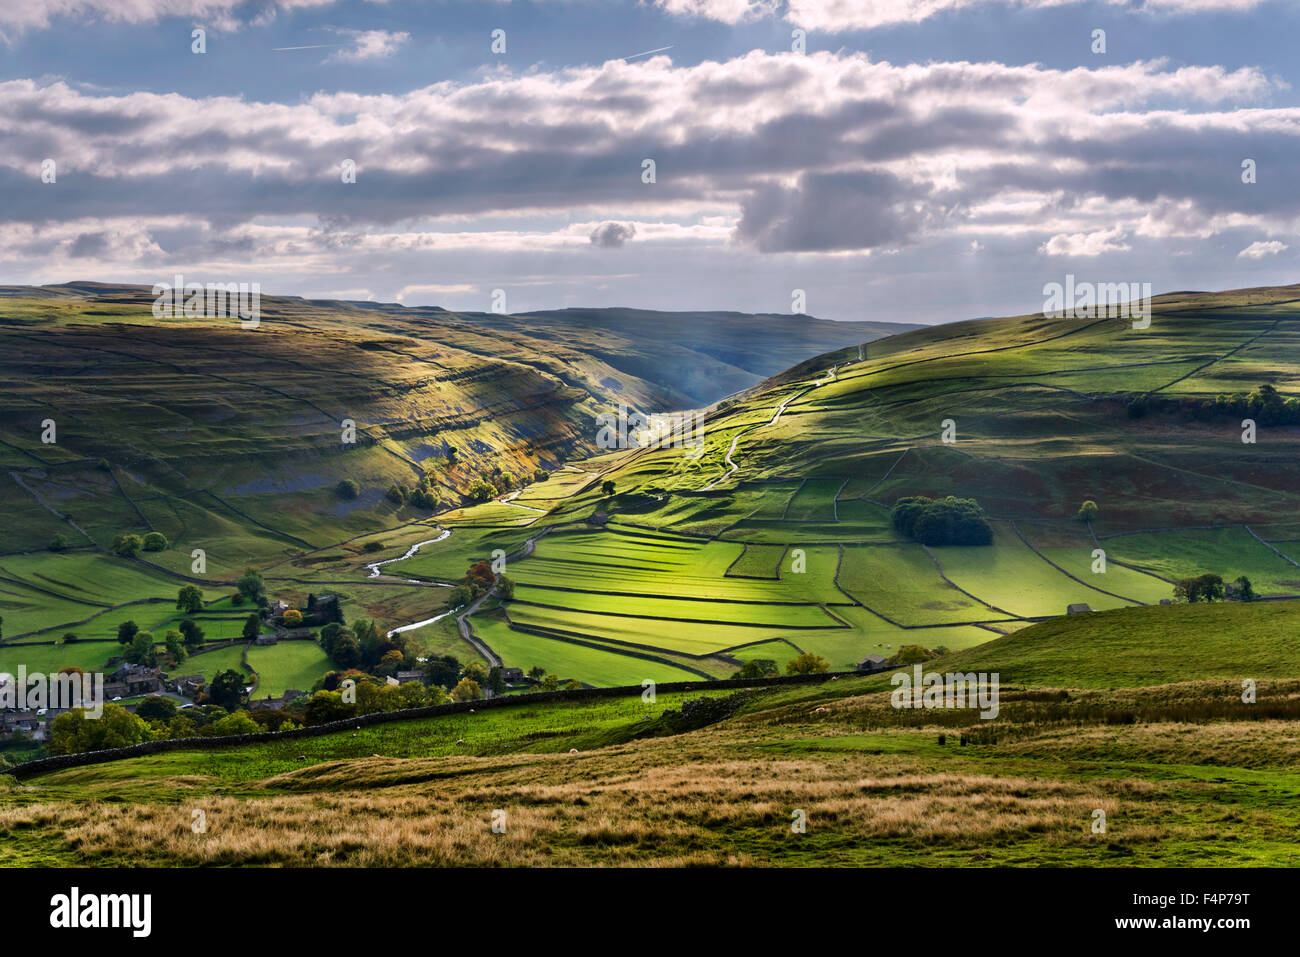 The village of Arncliffe in Littondale, in the Yorkshire Dales National Park, UK, on an Autumn afternoon. Stock Photo